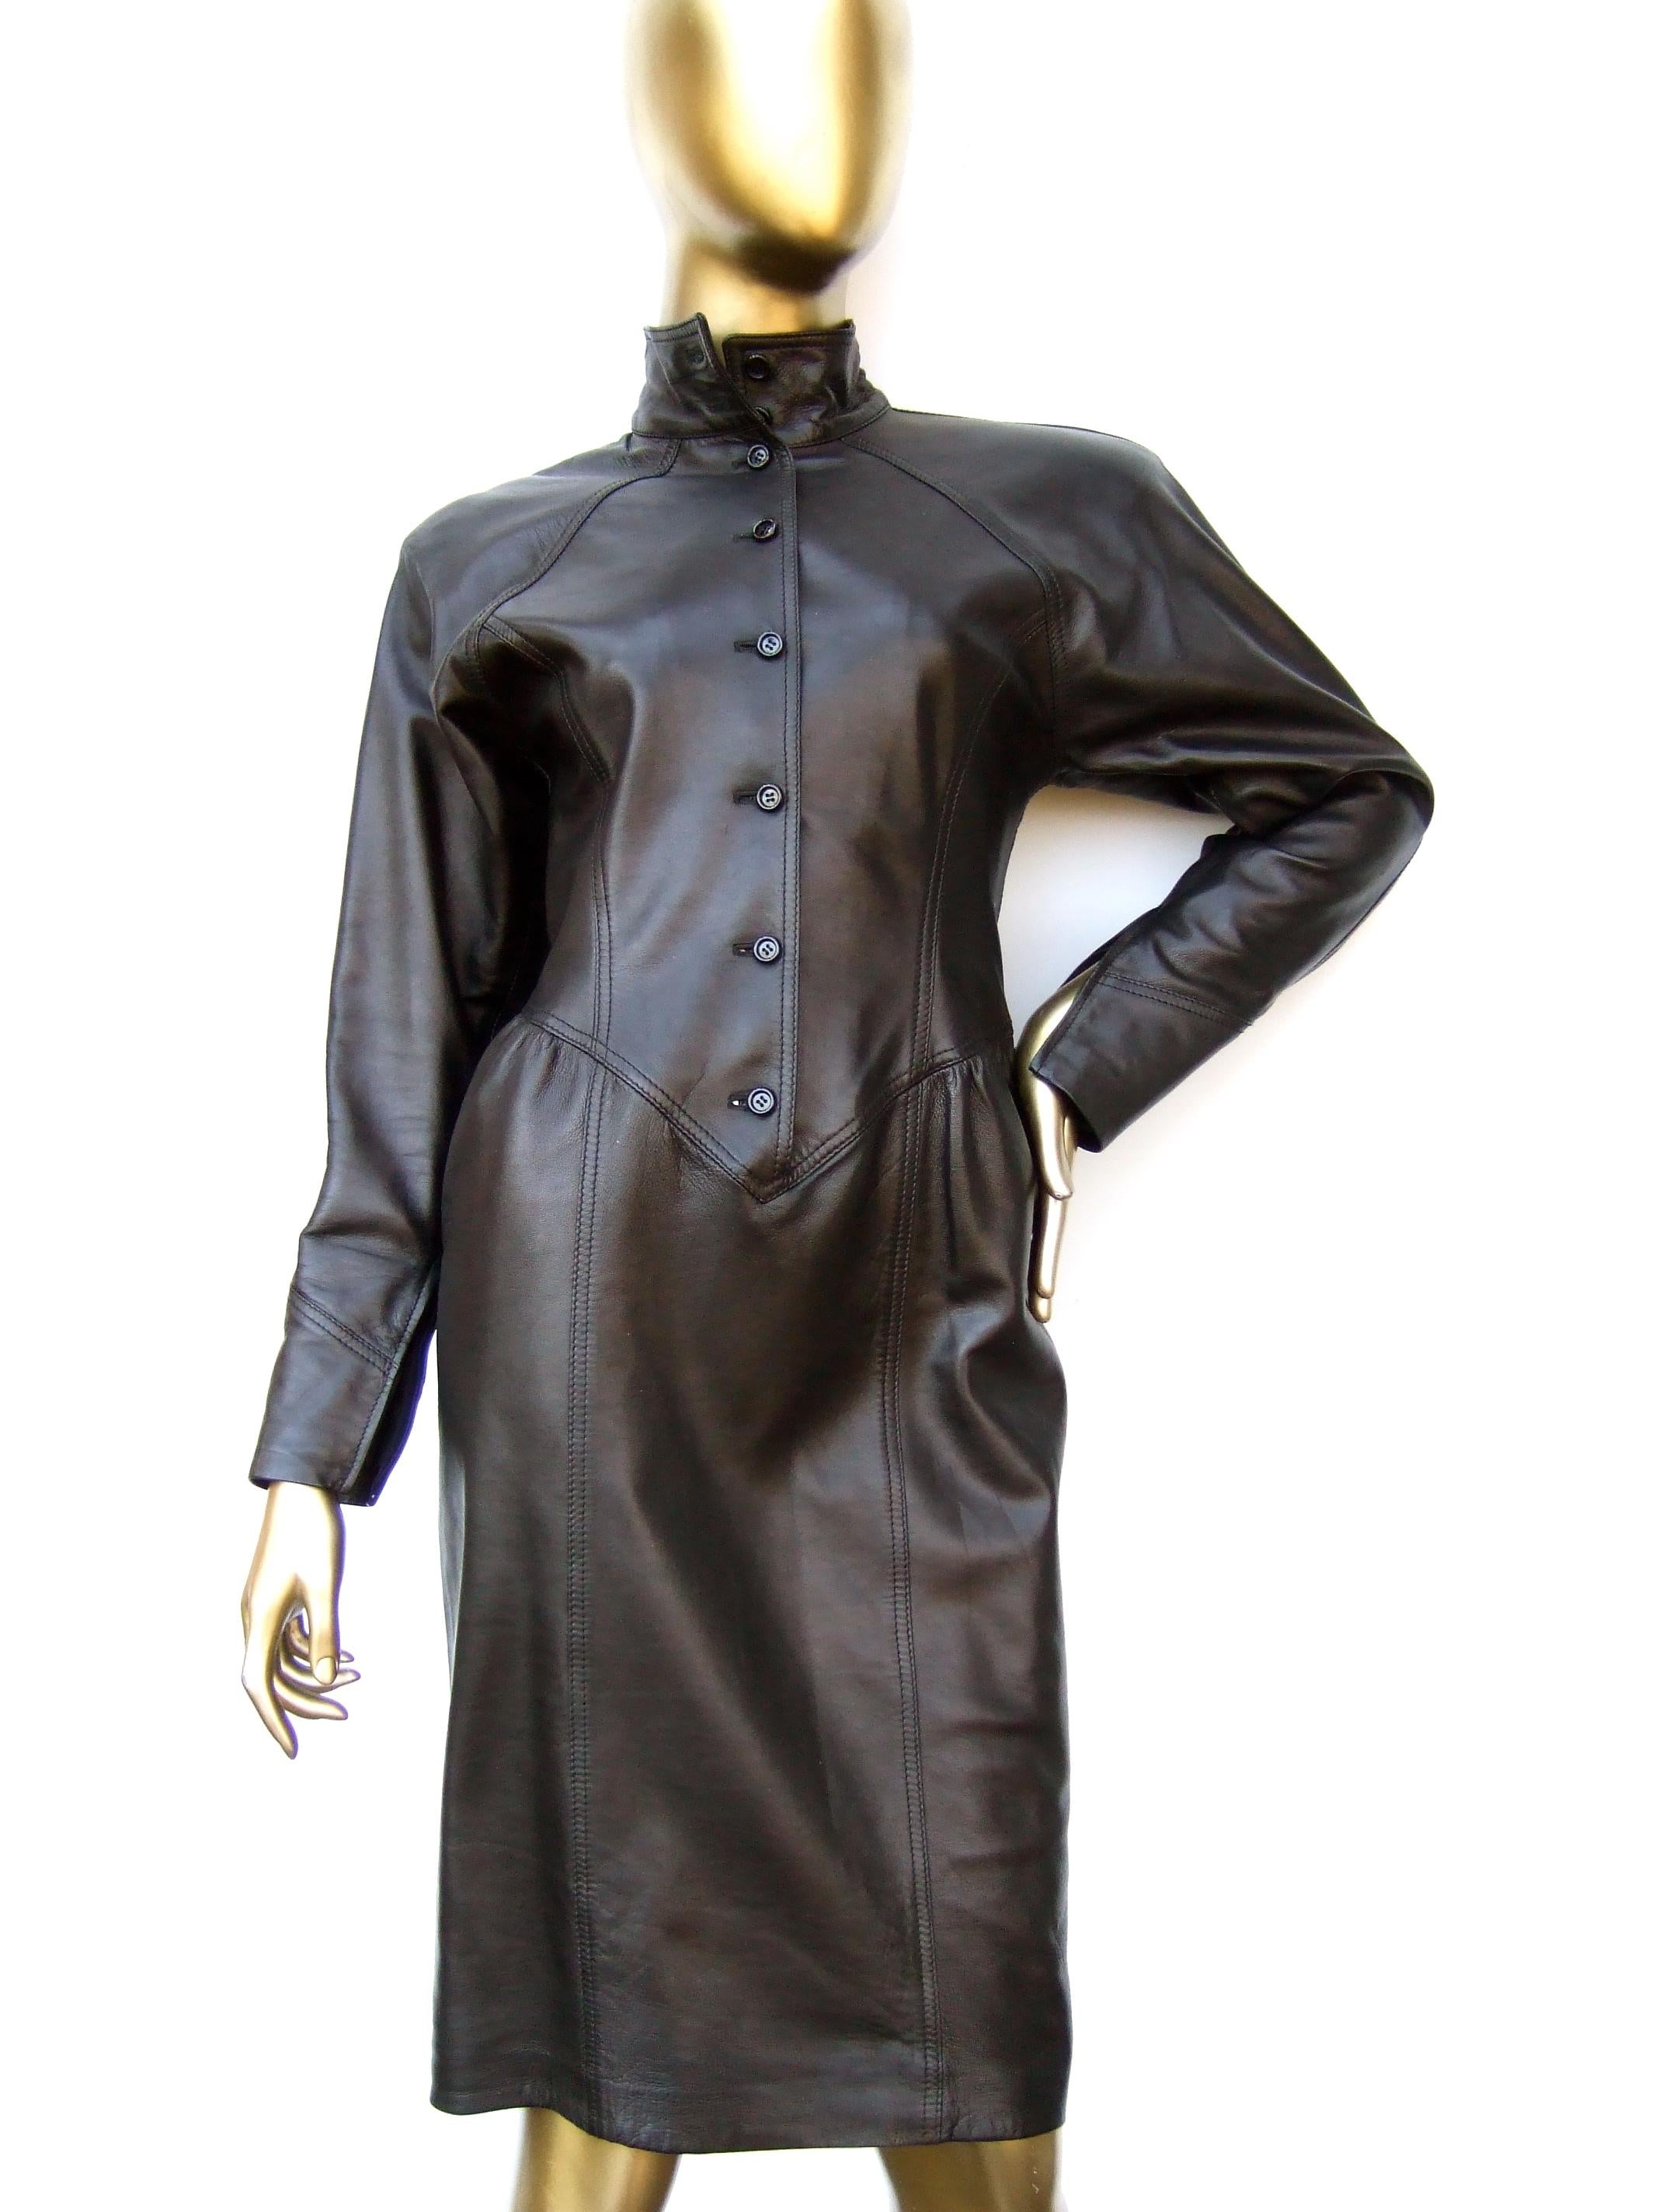 Emanuel Ungaro Paris Avant-garde Edgy Brown Leather Dress Made in Italy c 1980s For Sale 4